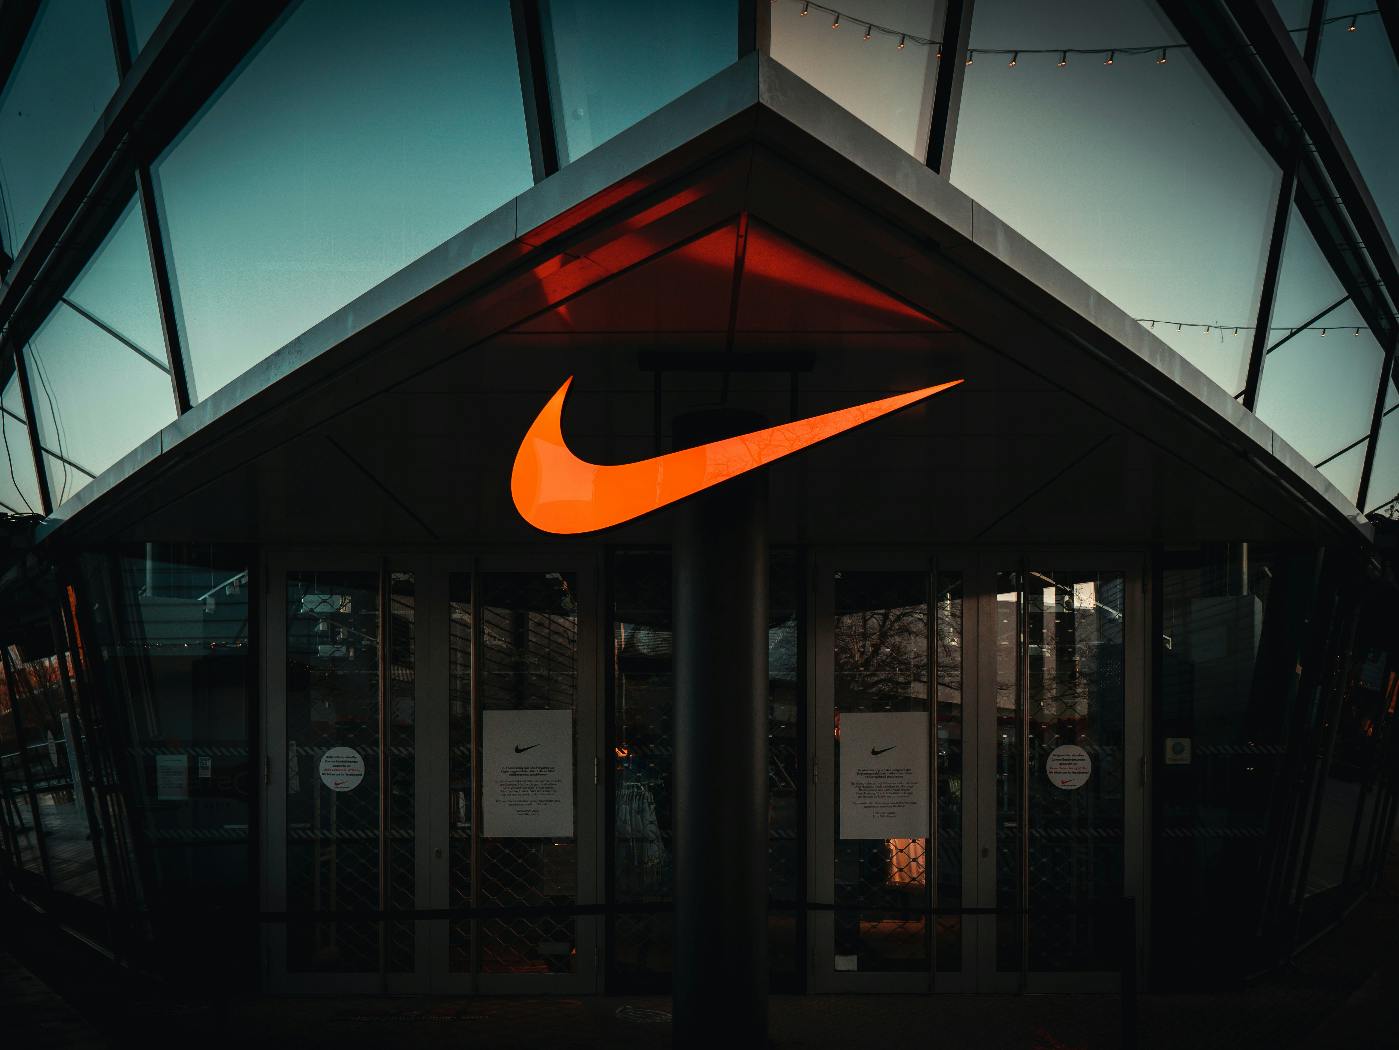 A buildoing with a giant Nike swoosh over the entrance